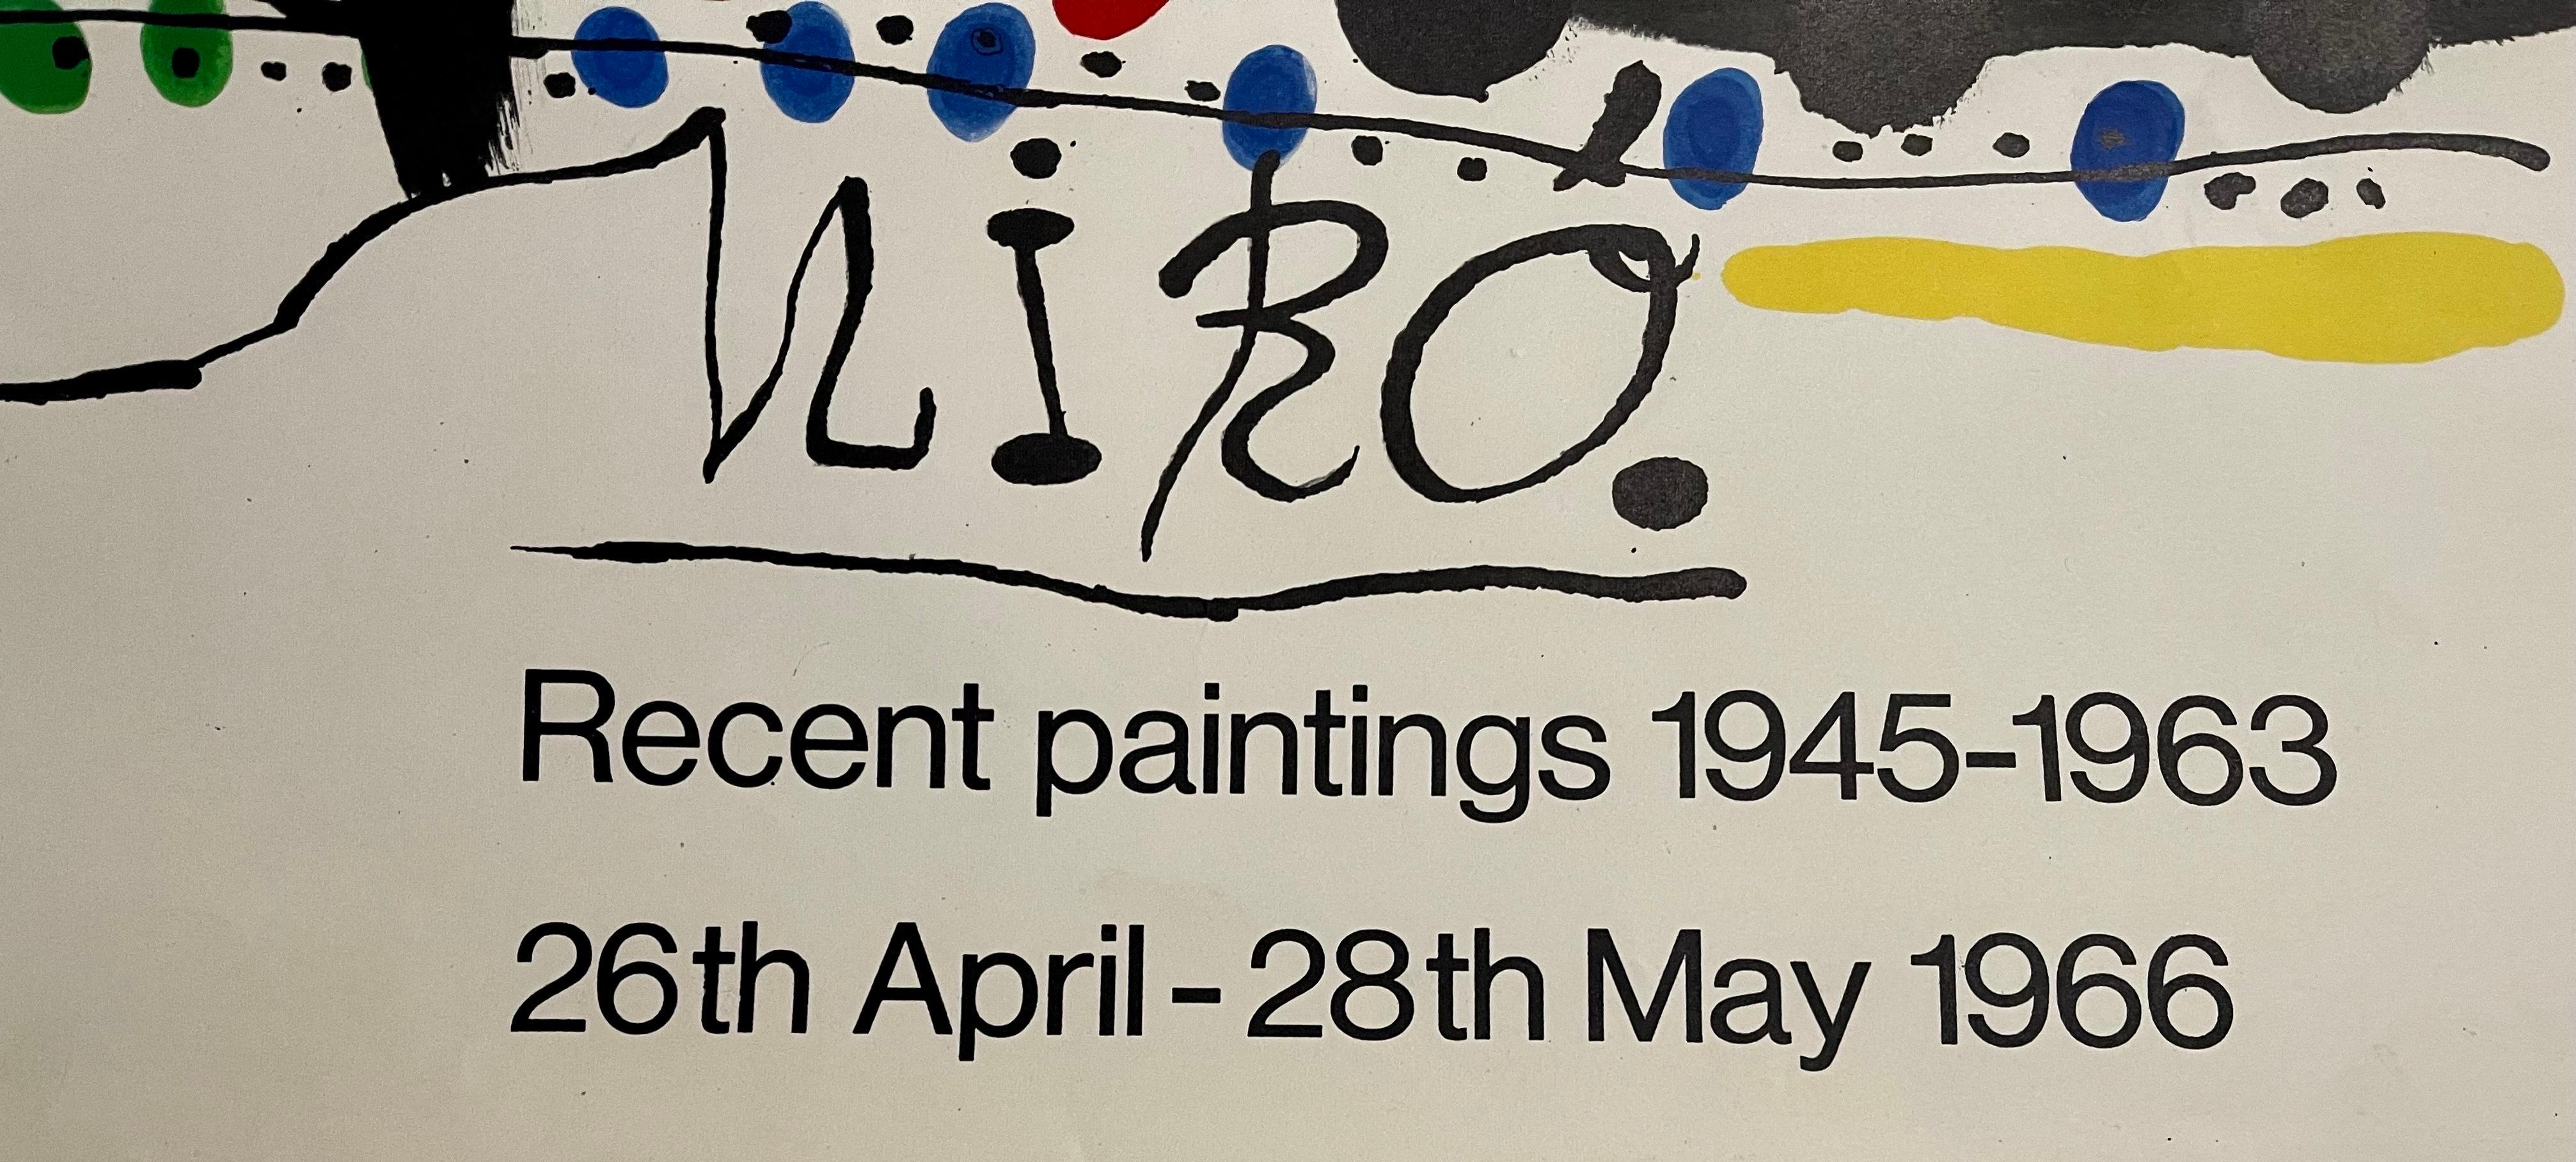 Joan Miro, Spanish (1893–1983)
Vintage lithograph poster from Arte Paris for a Marlborough Gallery show in London, England
Signed in the plate
Recent Paintings 1945-1963 Exhibition
Date: 1966
Size: 29.25 in. x 19.75 inches
Publisher: Arte Adrien